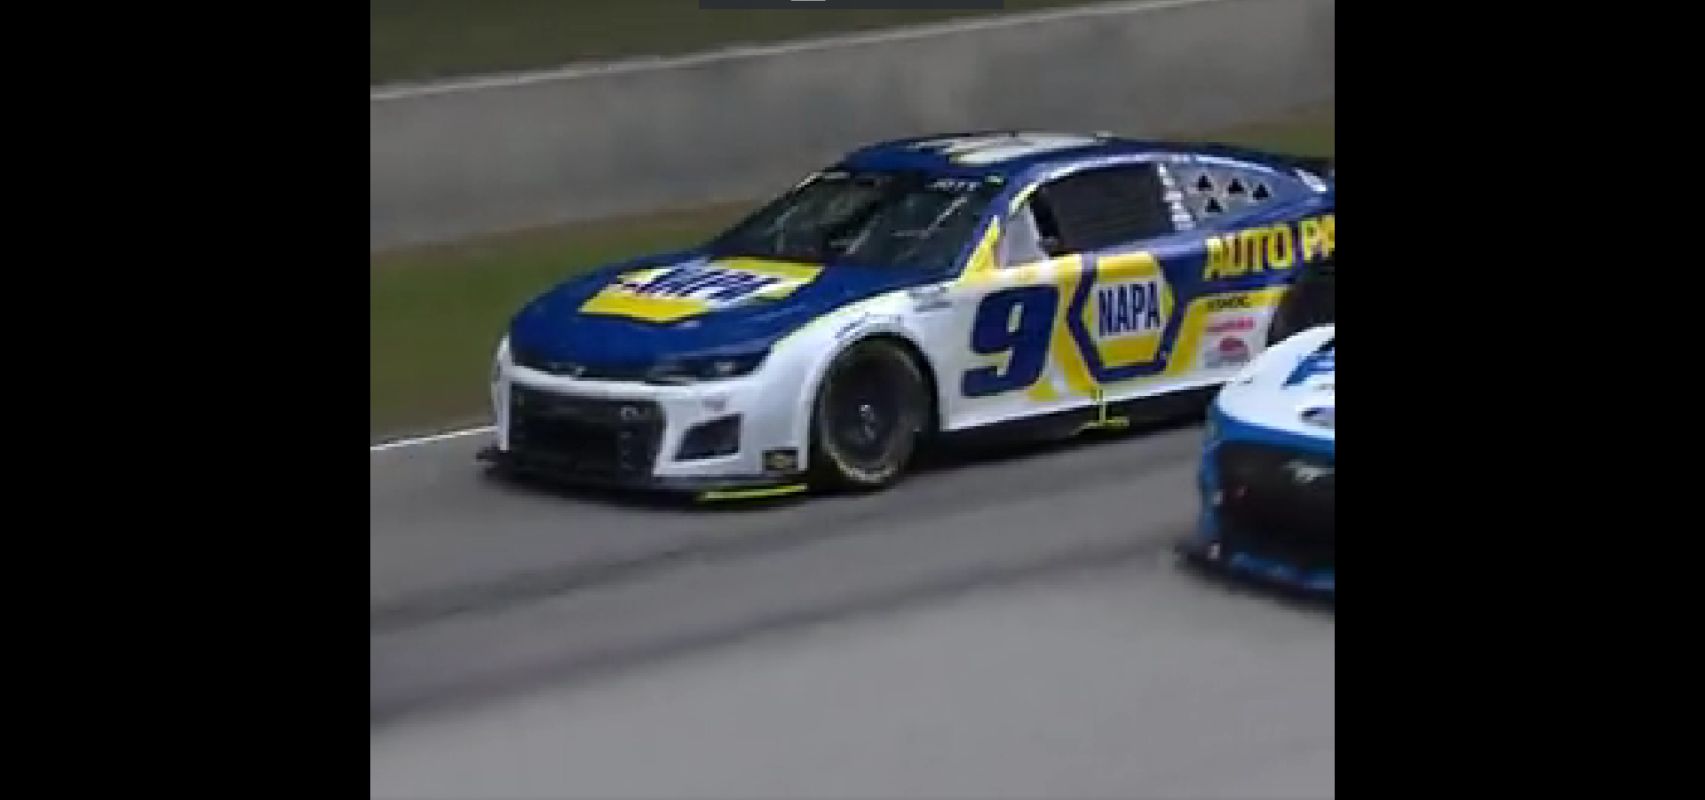 
#9 car looks like it is having some problems on the pace laps.